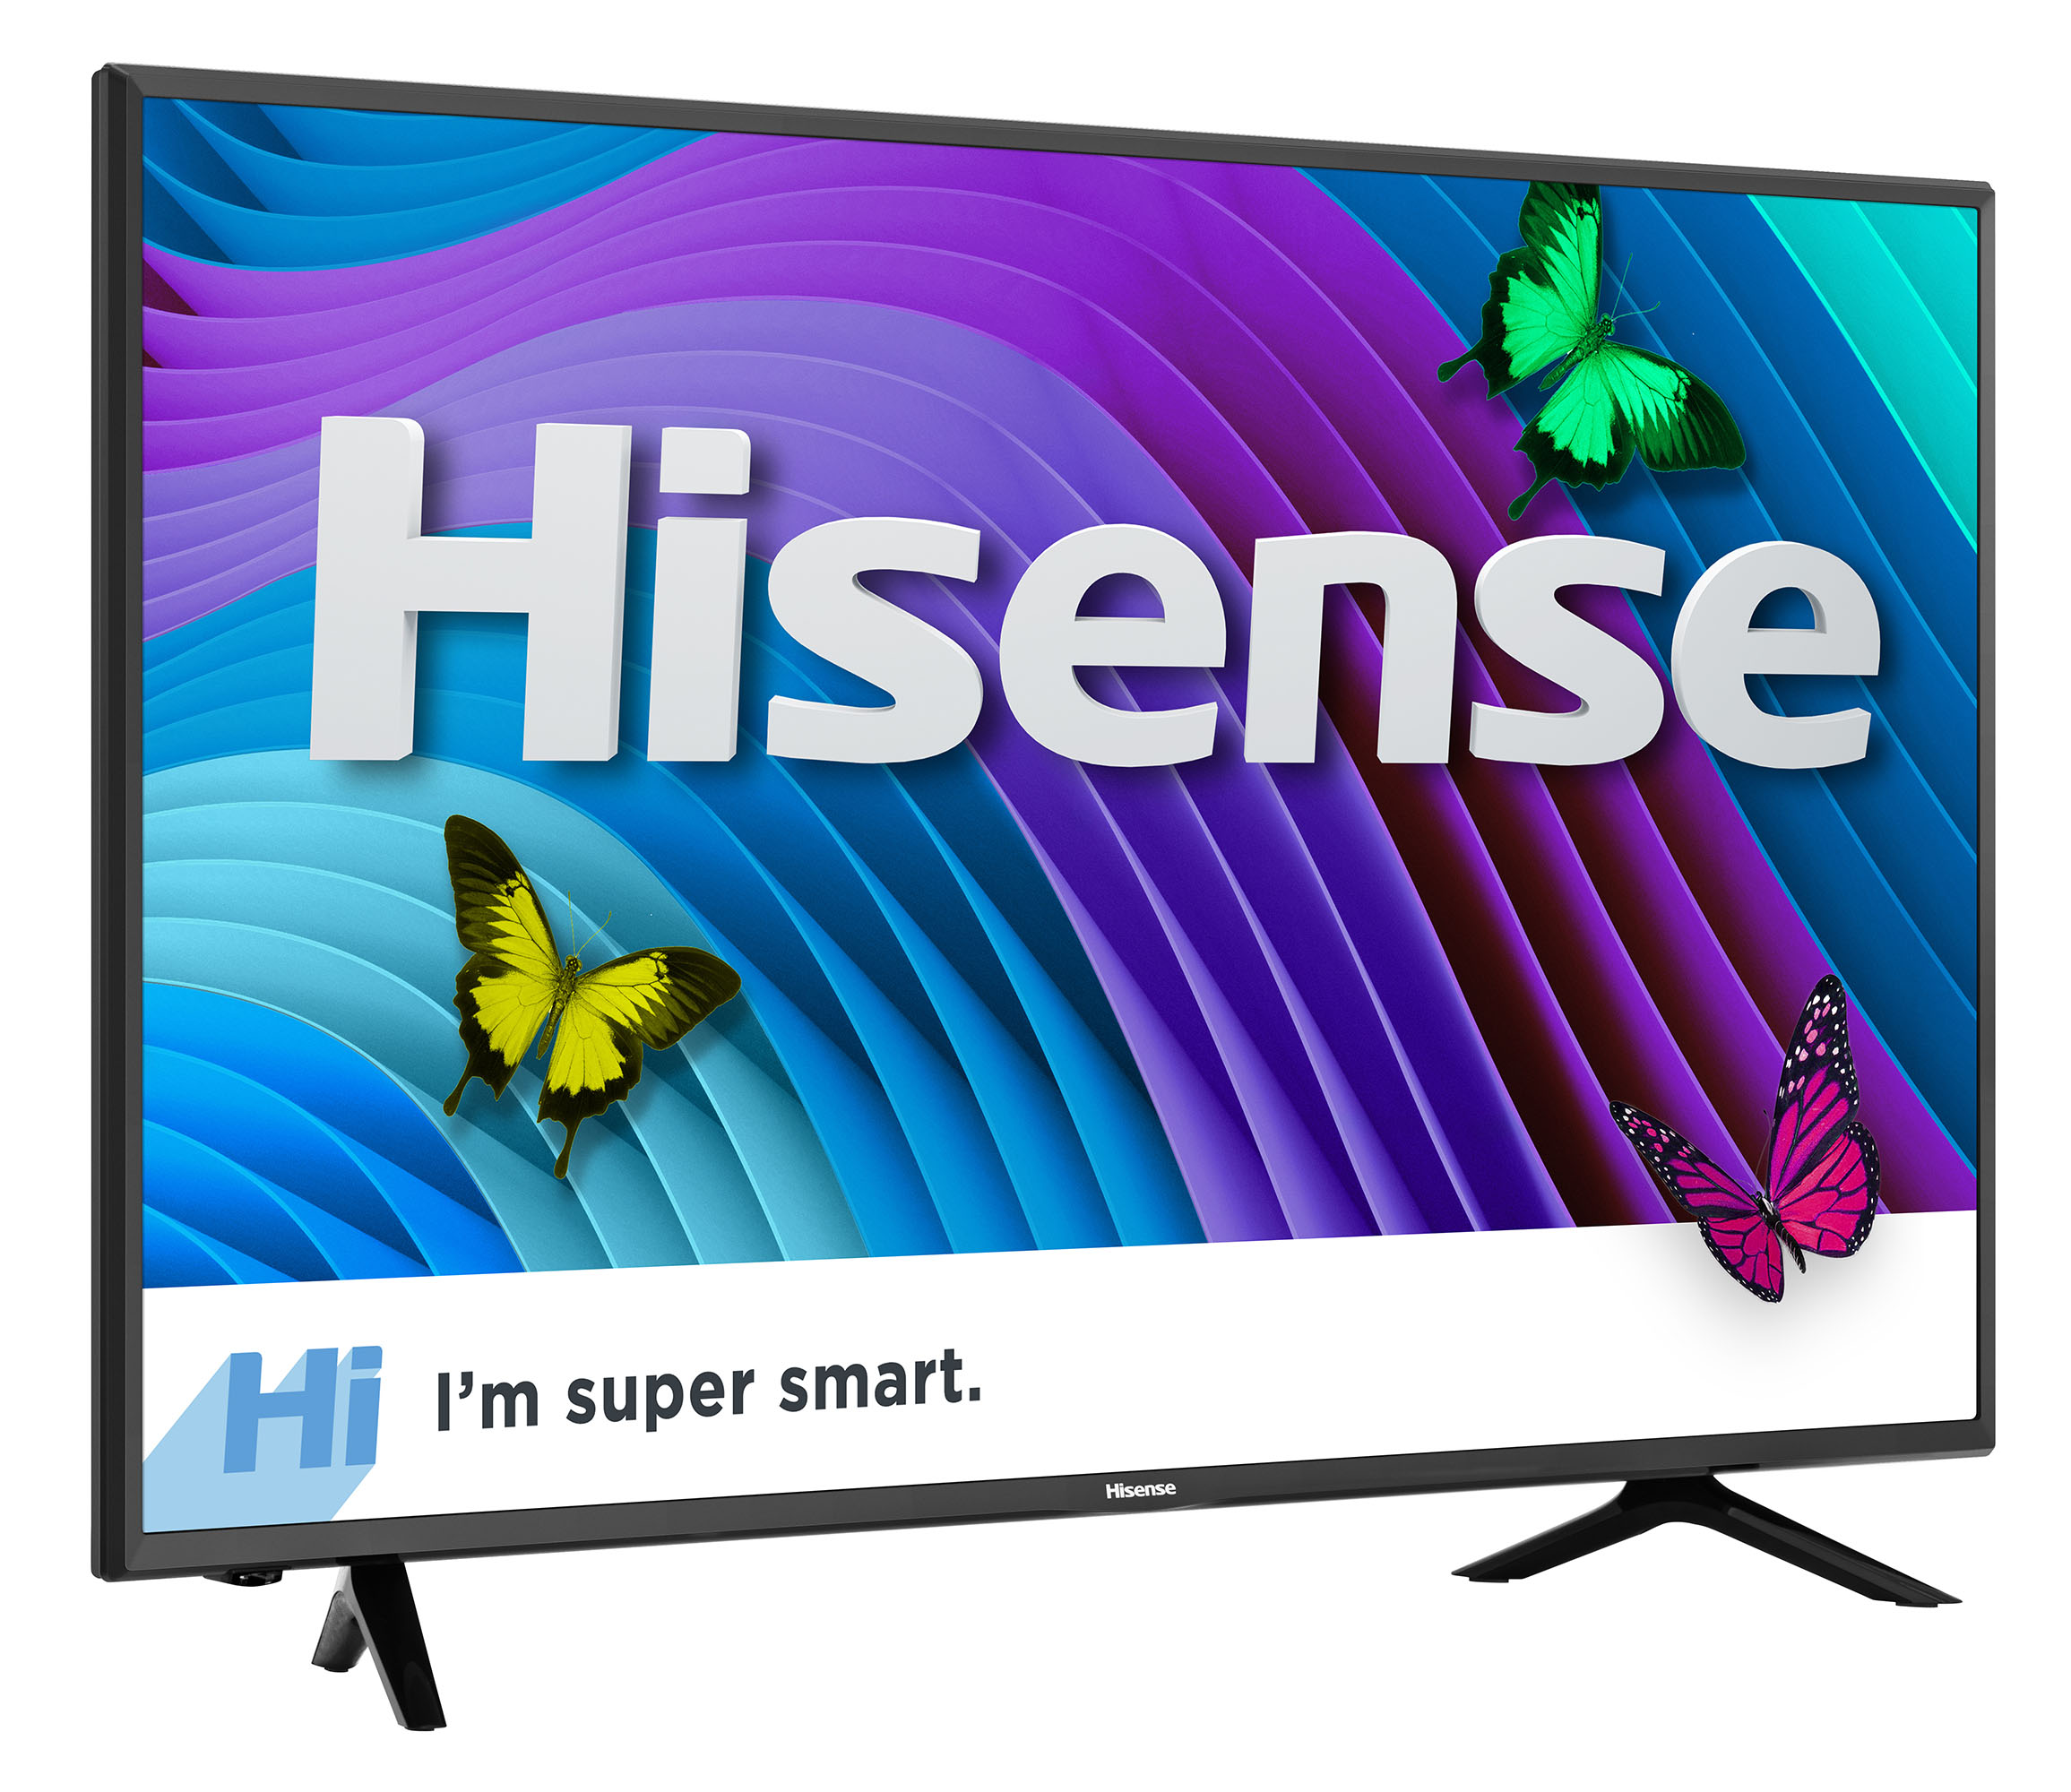 Hisense 55″ 4K ultra HD smart TV with HDR for $300